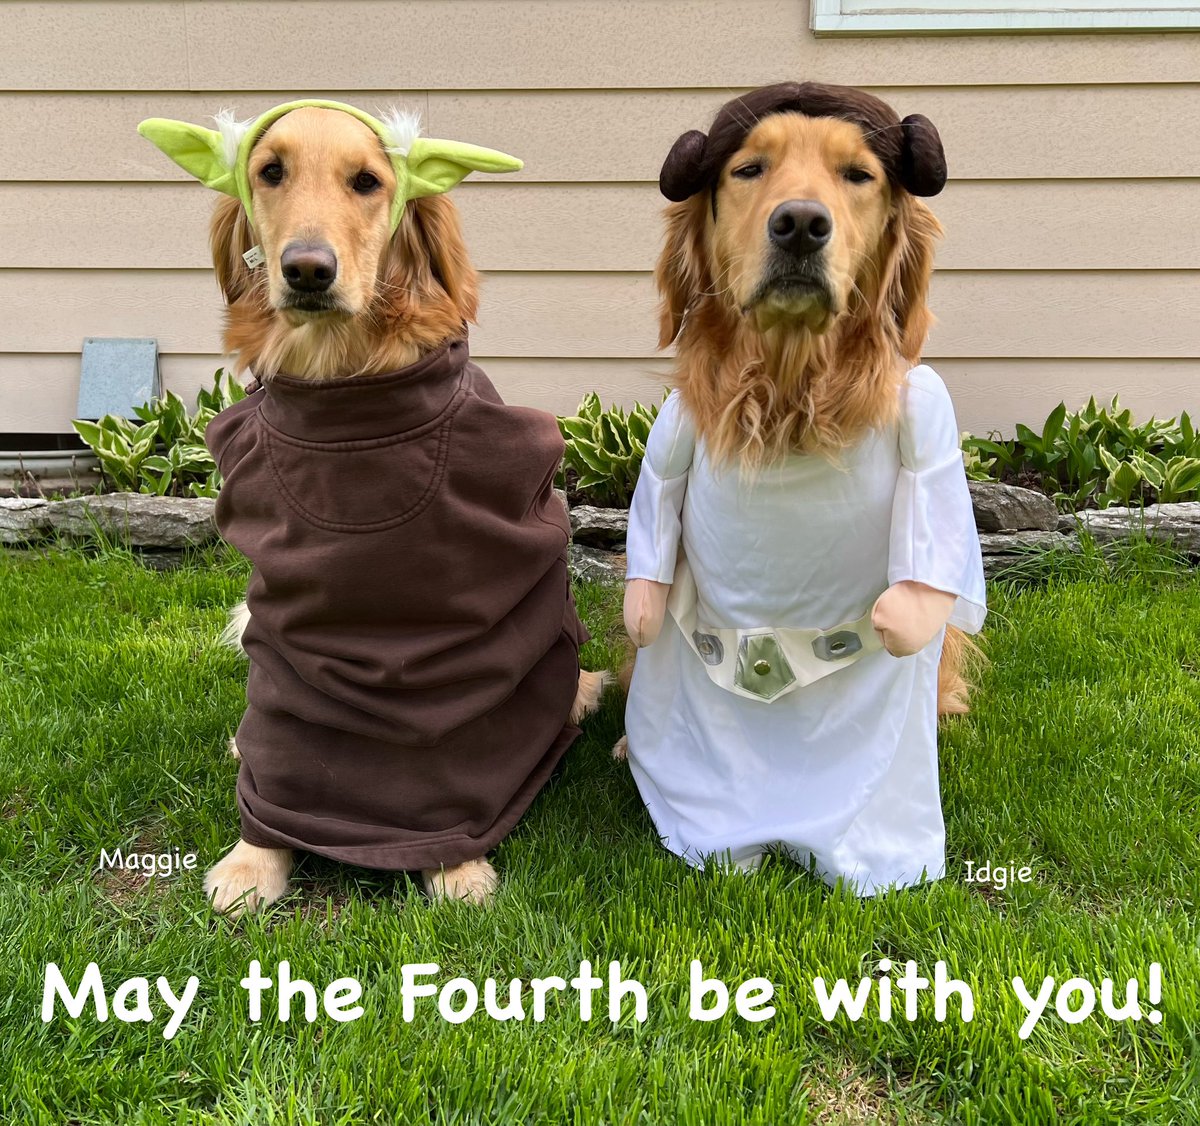 Well, the rain finally stopped! We hope we’re not too late to wish you happy #StarWarsDay!! #maythe4thbewithyou!